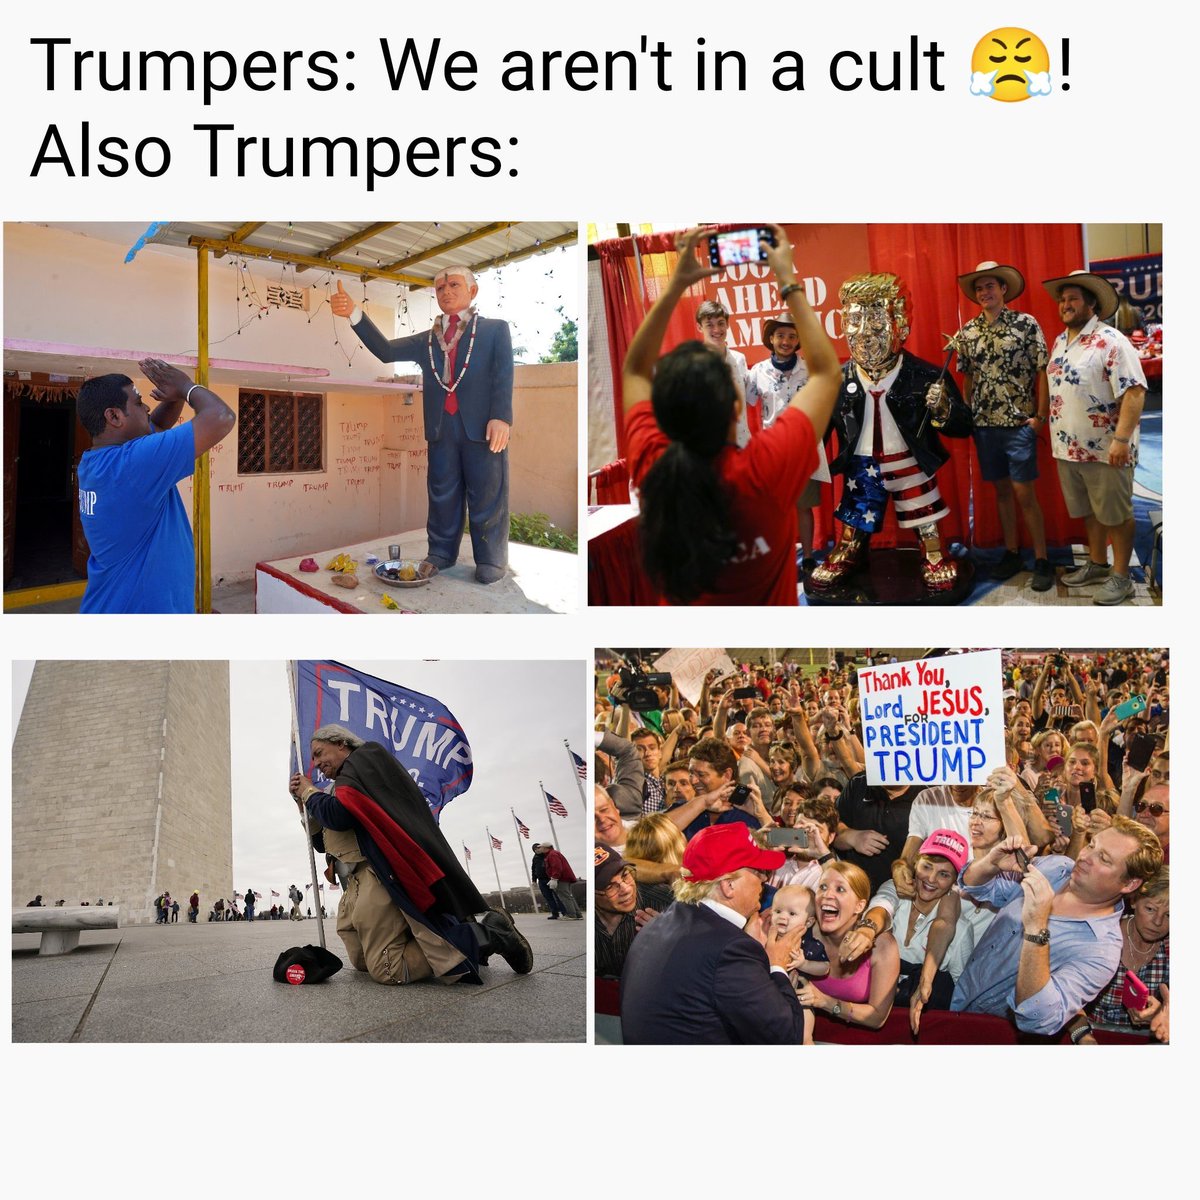 I can't imagine being unhinged enough to worship a political figure (especially #45), can you? #antitrump #trumpcult #magaisformorons #makeamericasmartagain #trumpmemes